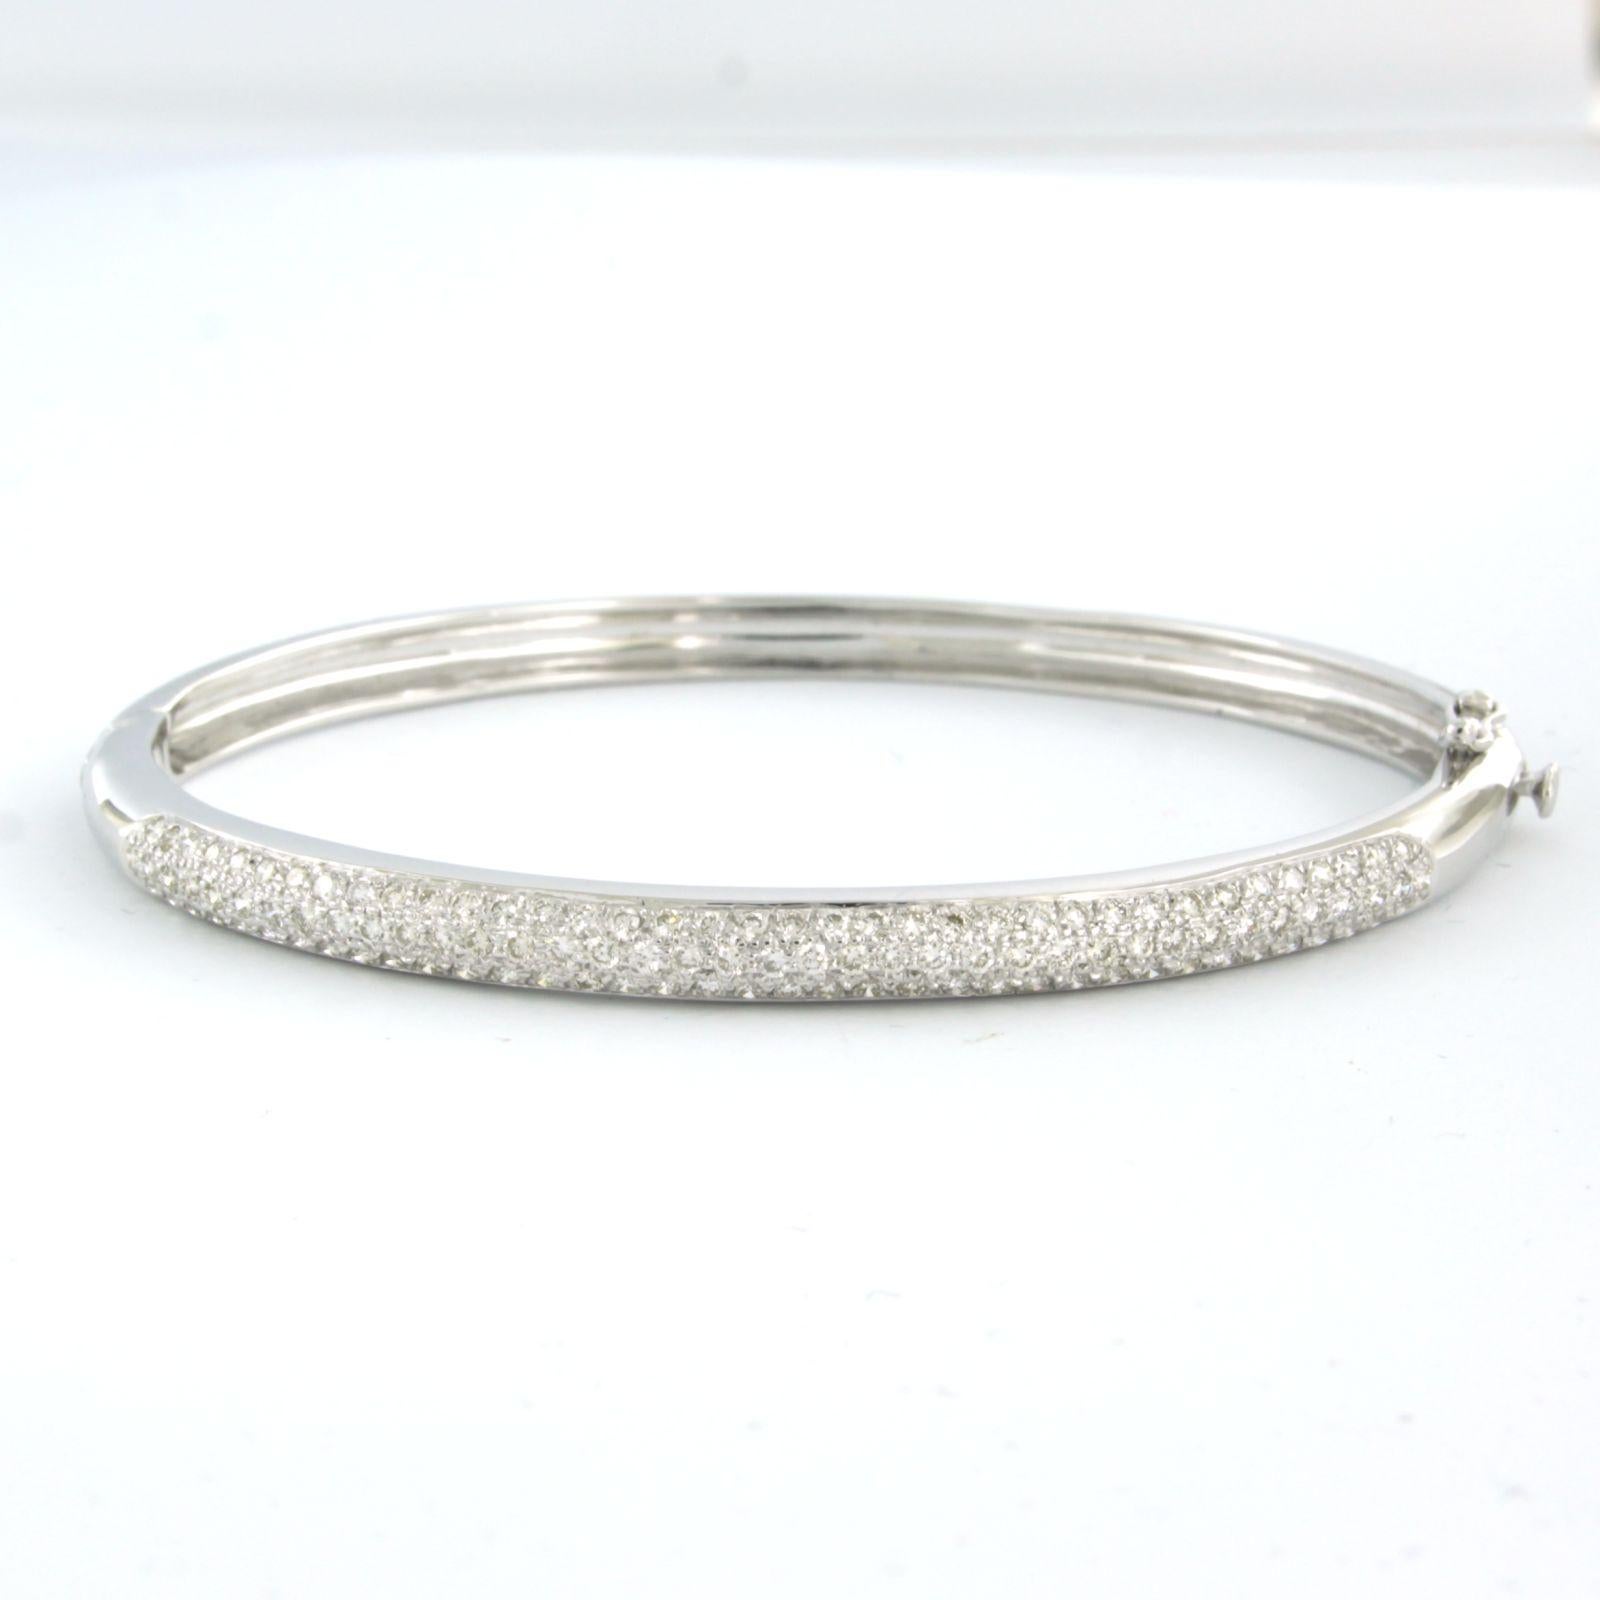 18k white gold hinge bracelet set with brilliant cut diamonds up to . 1.20ct - F/G - VS/SI - inner size 6.1 cm x 5.3 cm

detailed description:

Inner size of the bracelet is 6.1 cm by 5.3 cm wide

The bracelet is 5.0 mm wide and 3.0 mm high

weight